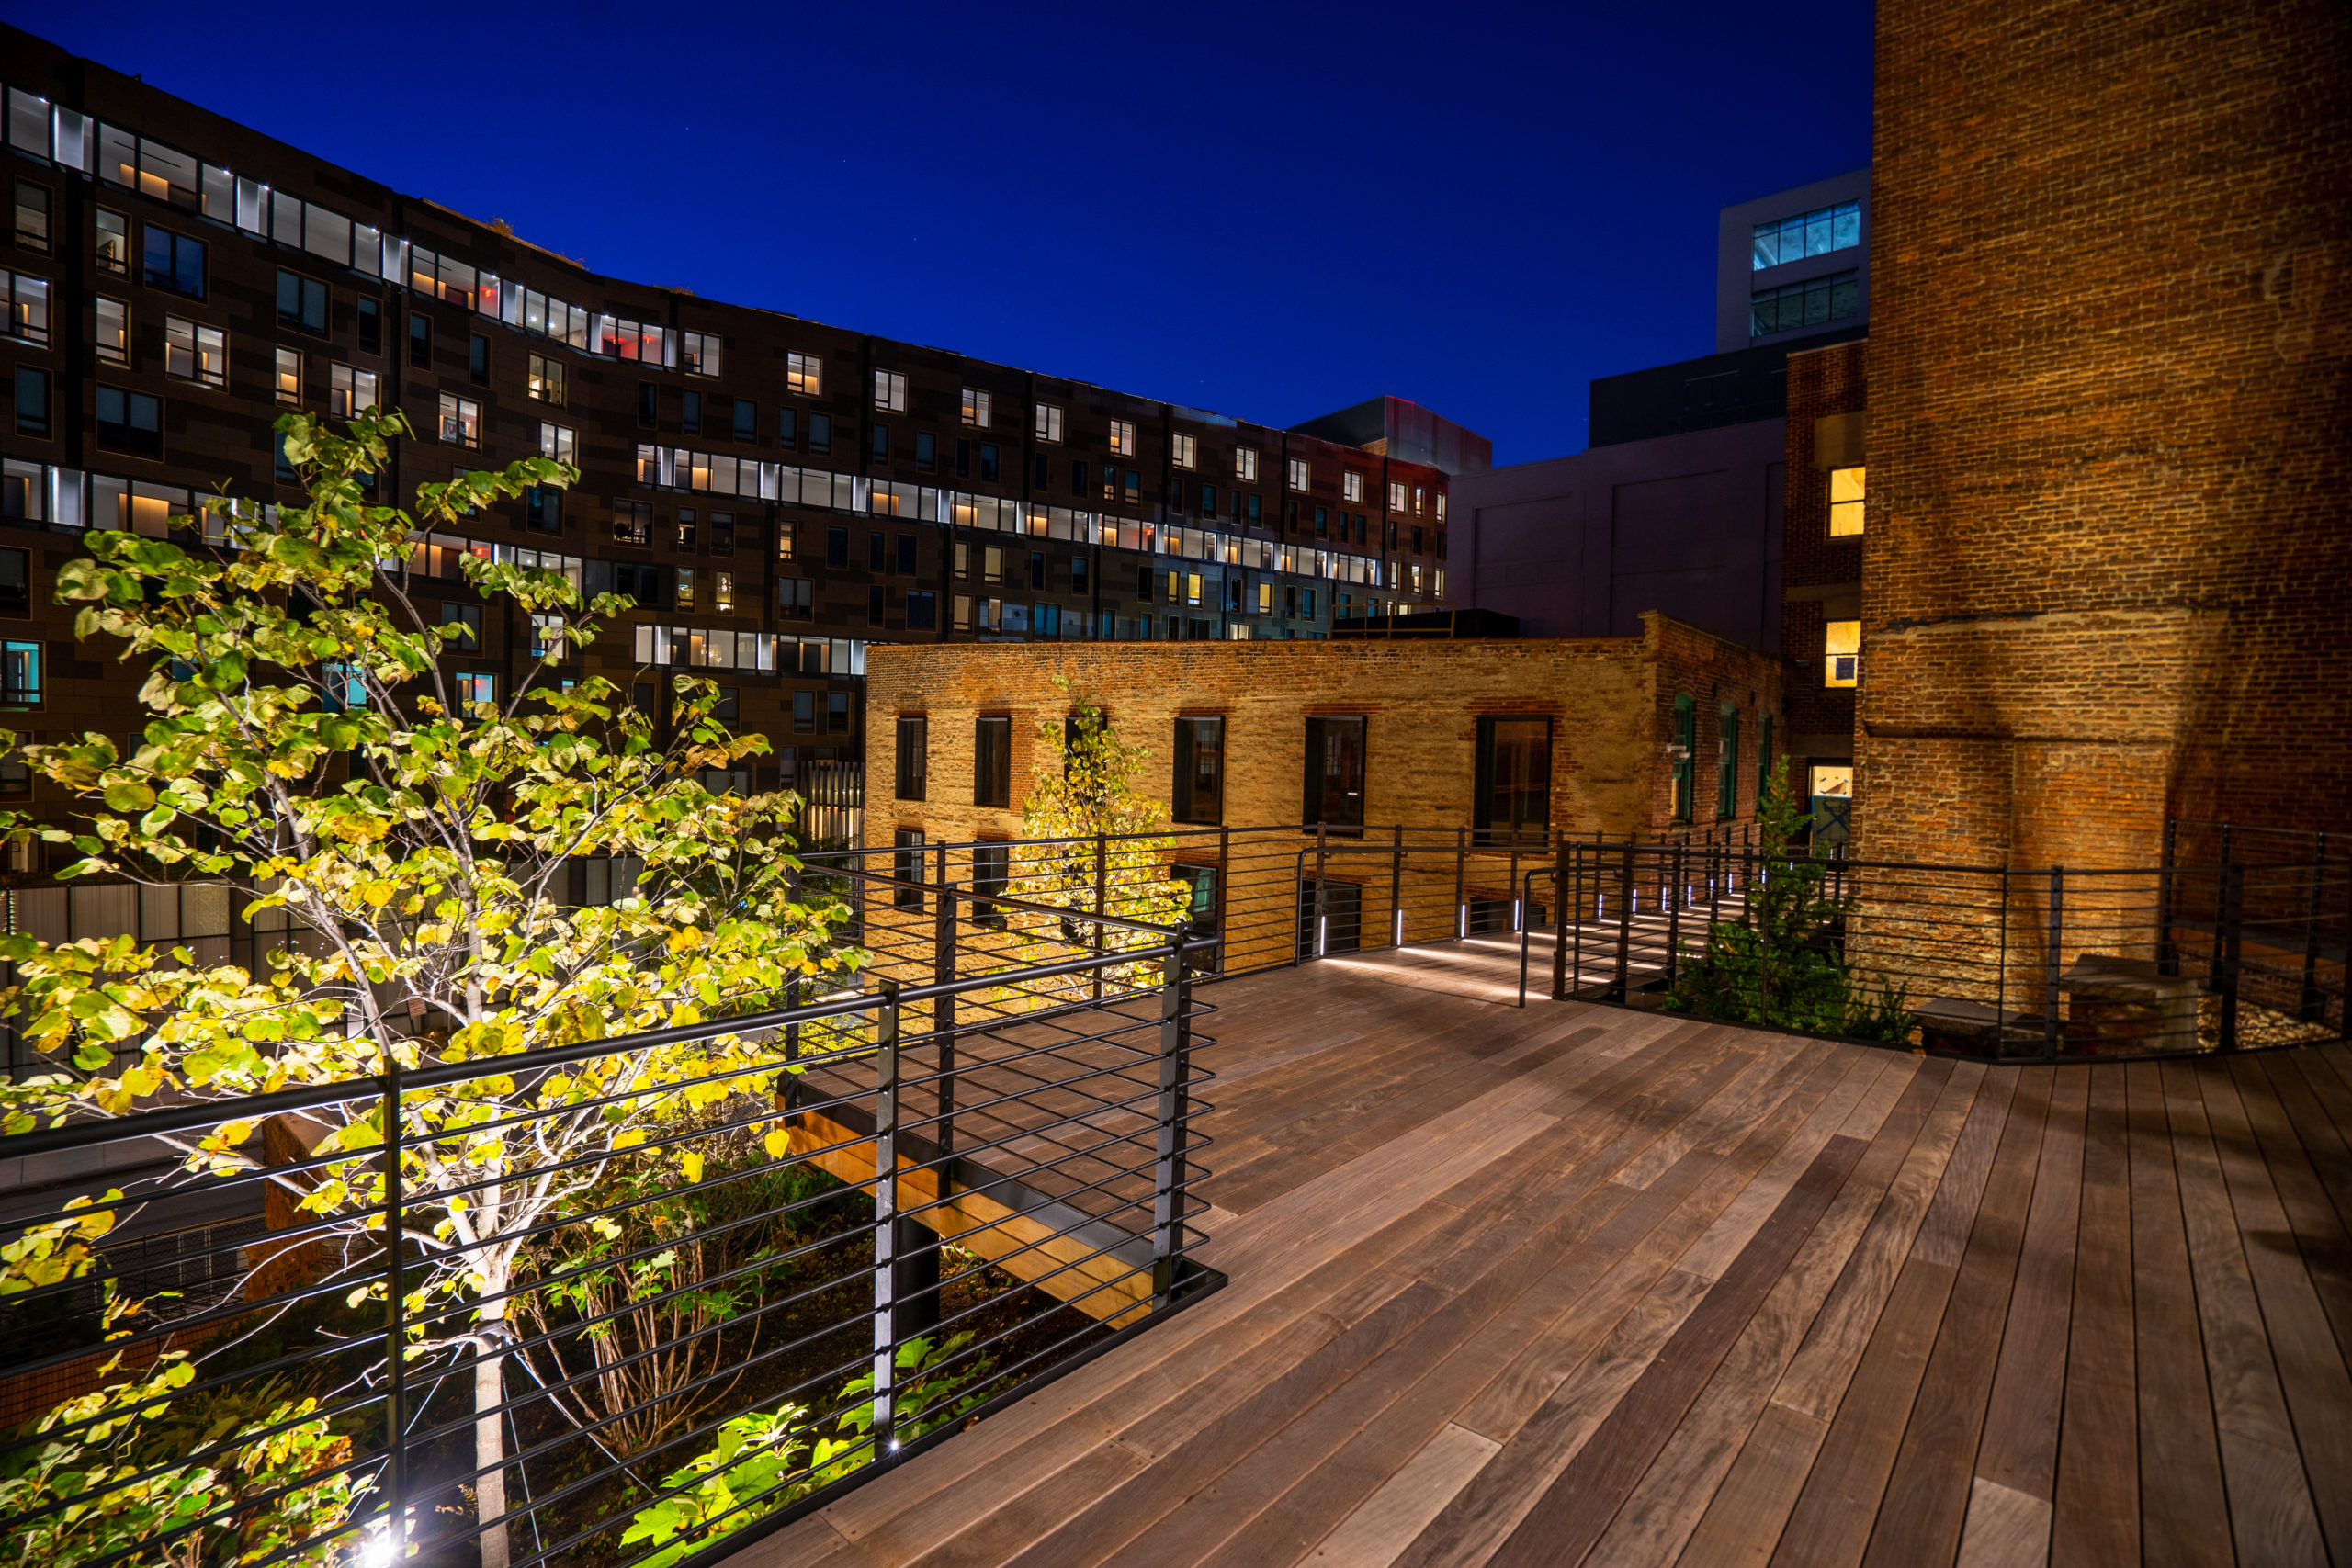 The deck behind Panorama’s 58 Columbia Heights looks inviting. Photo by Steven Tupu/Terrain-NYC